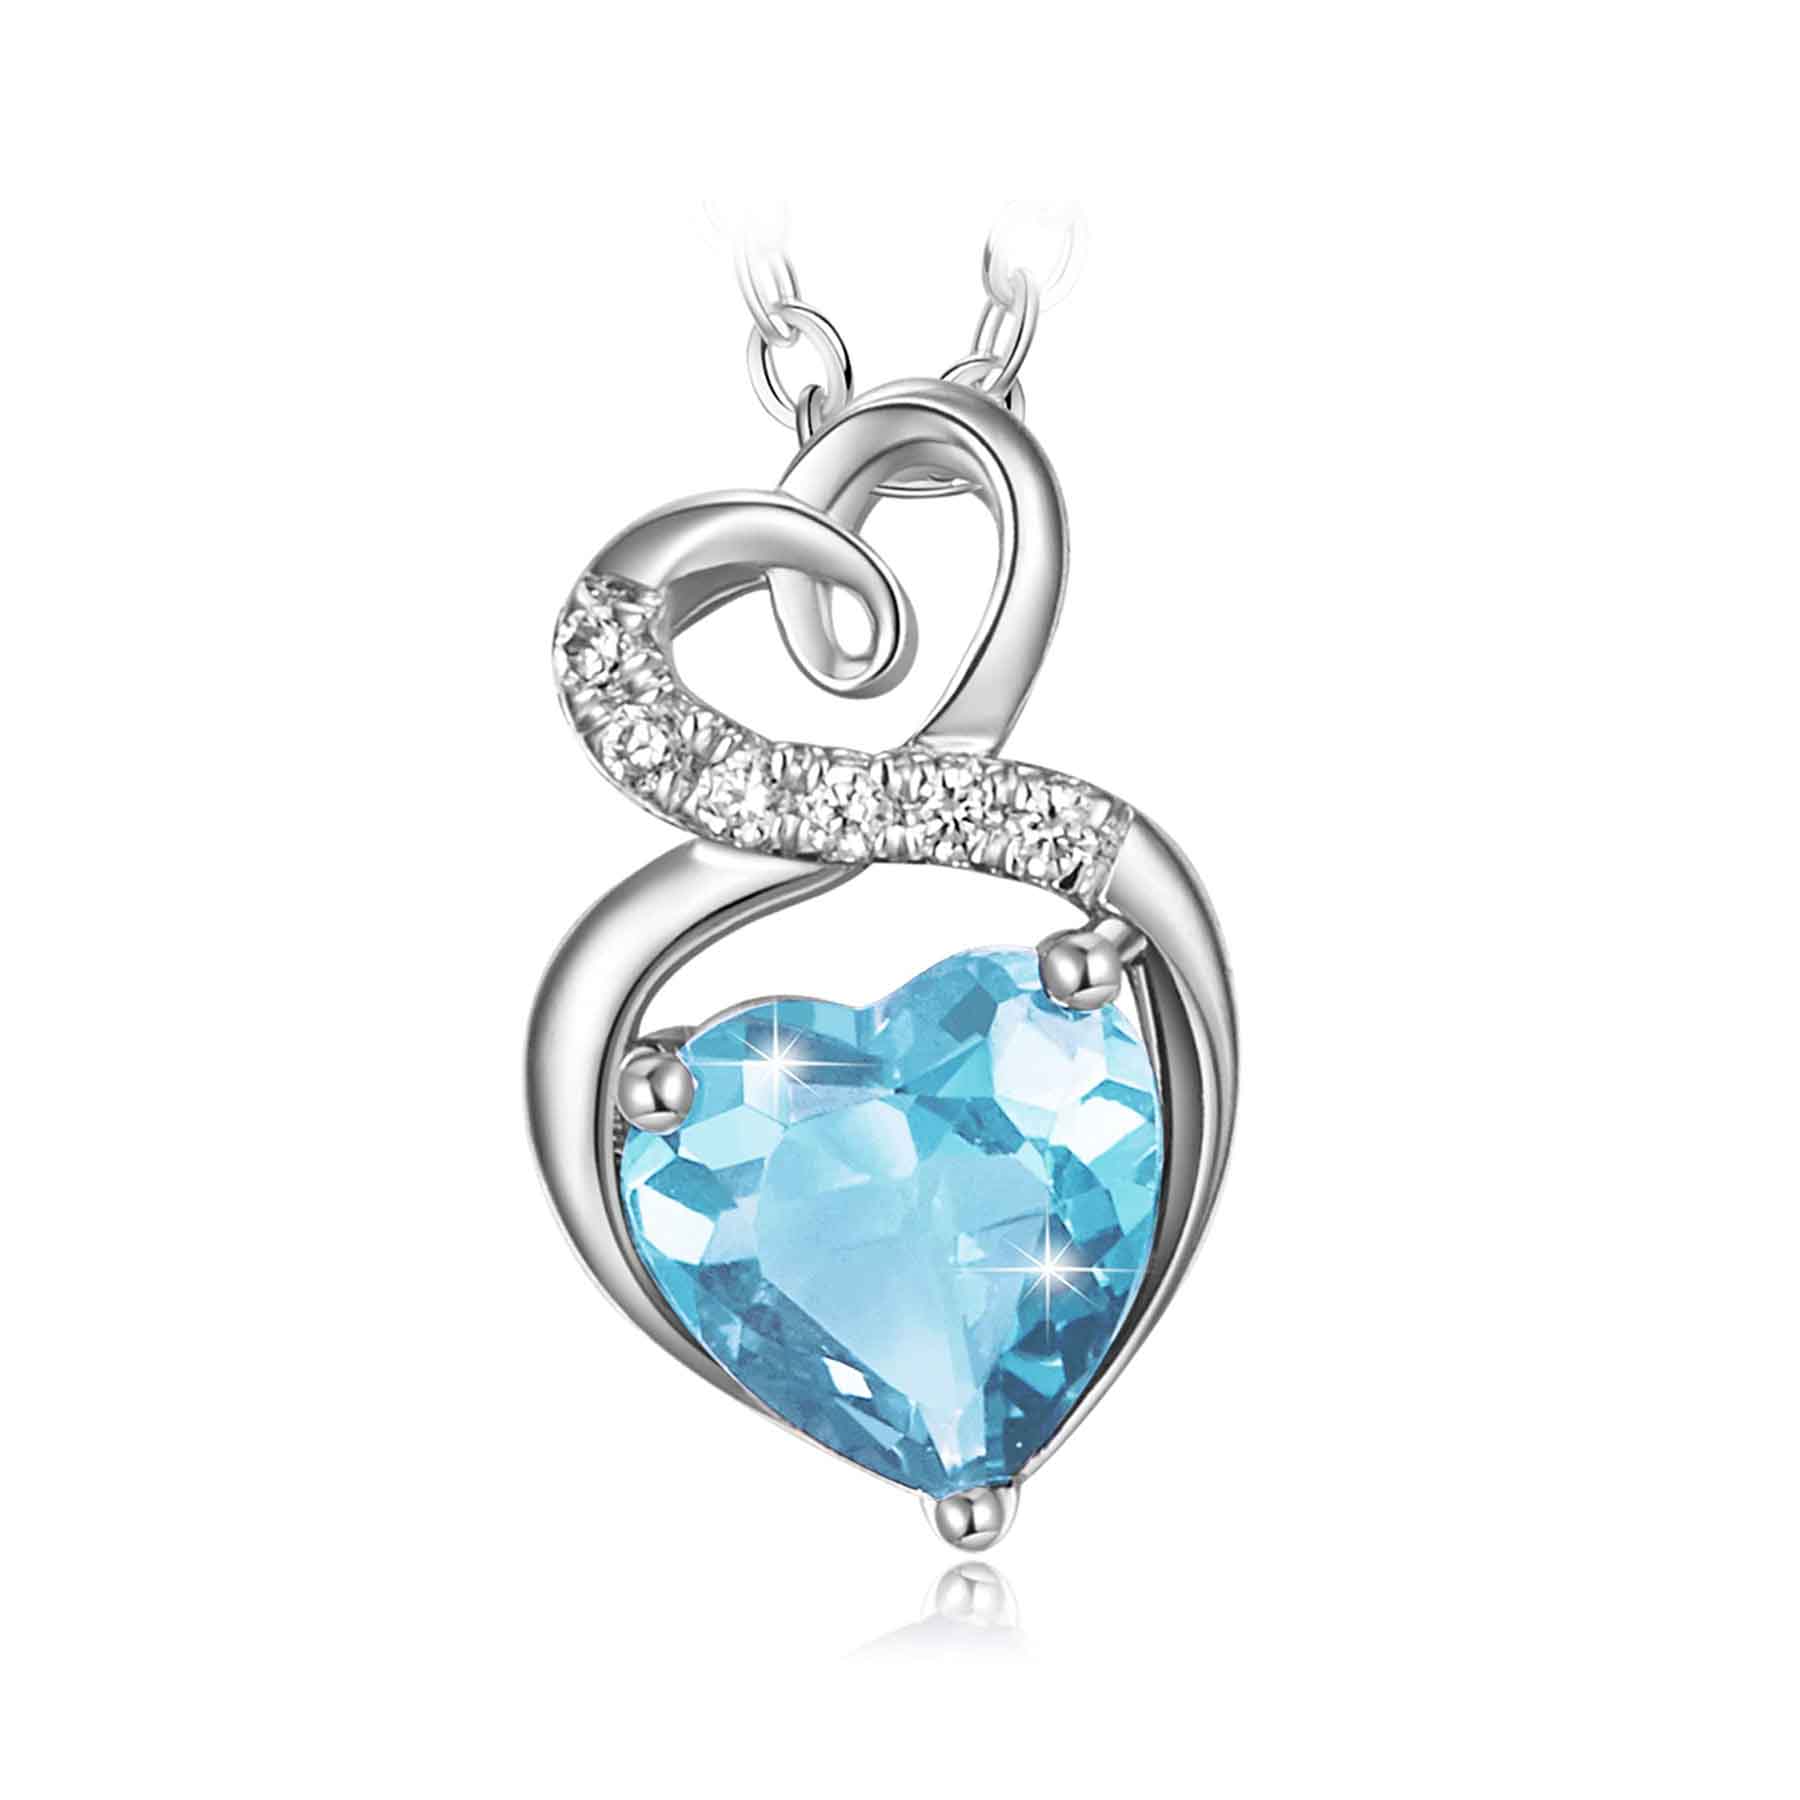 Double Heart Pendant Necklace for Women with Simulated Birthstone